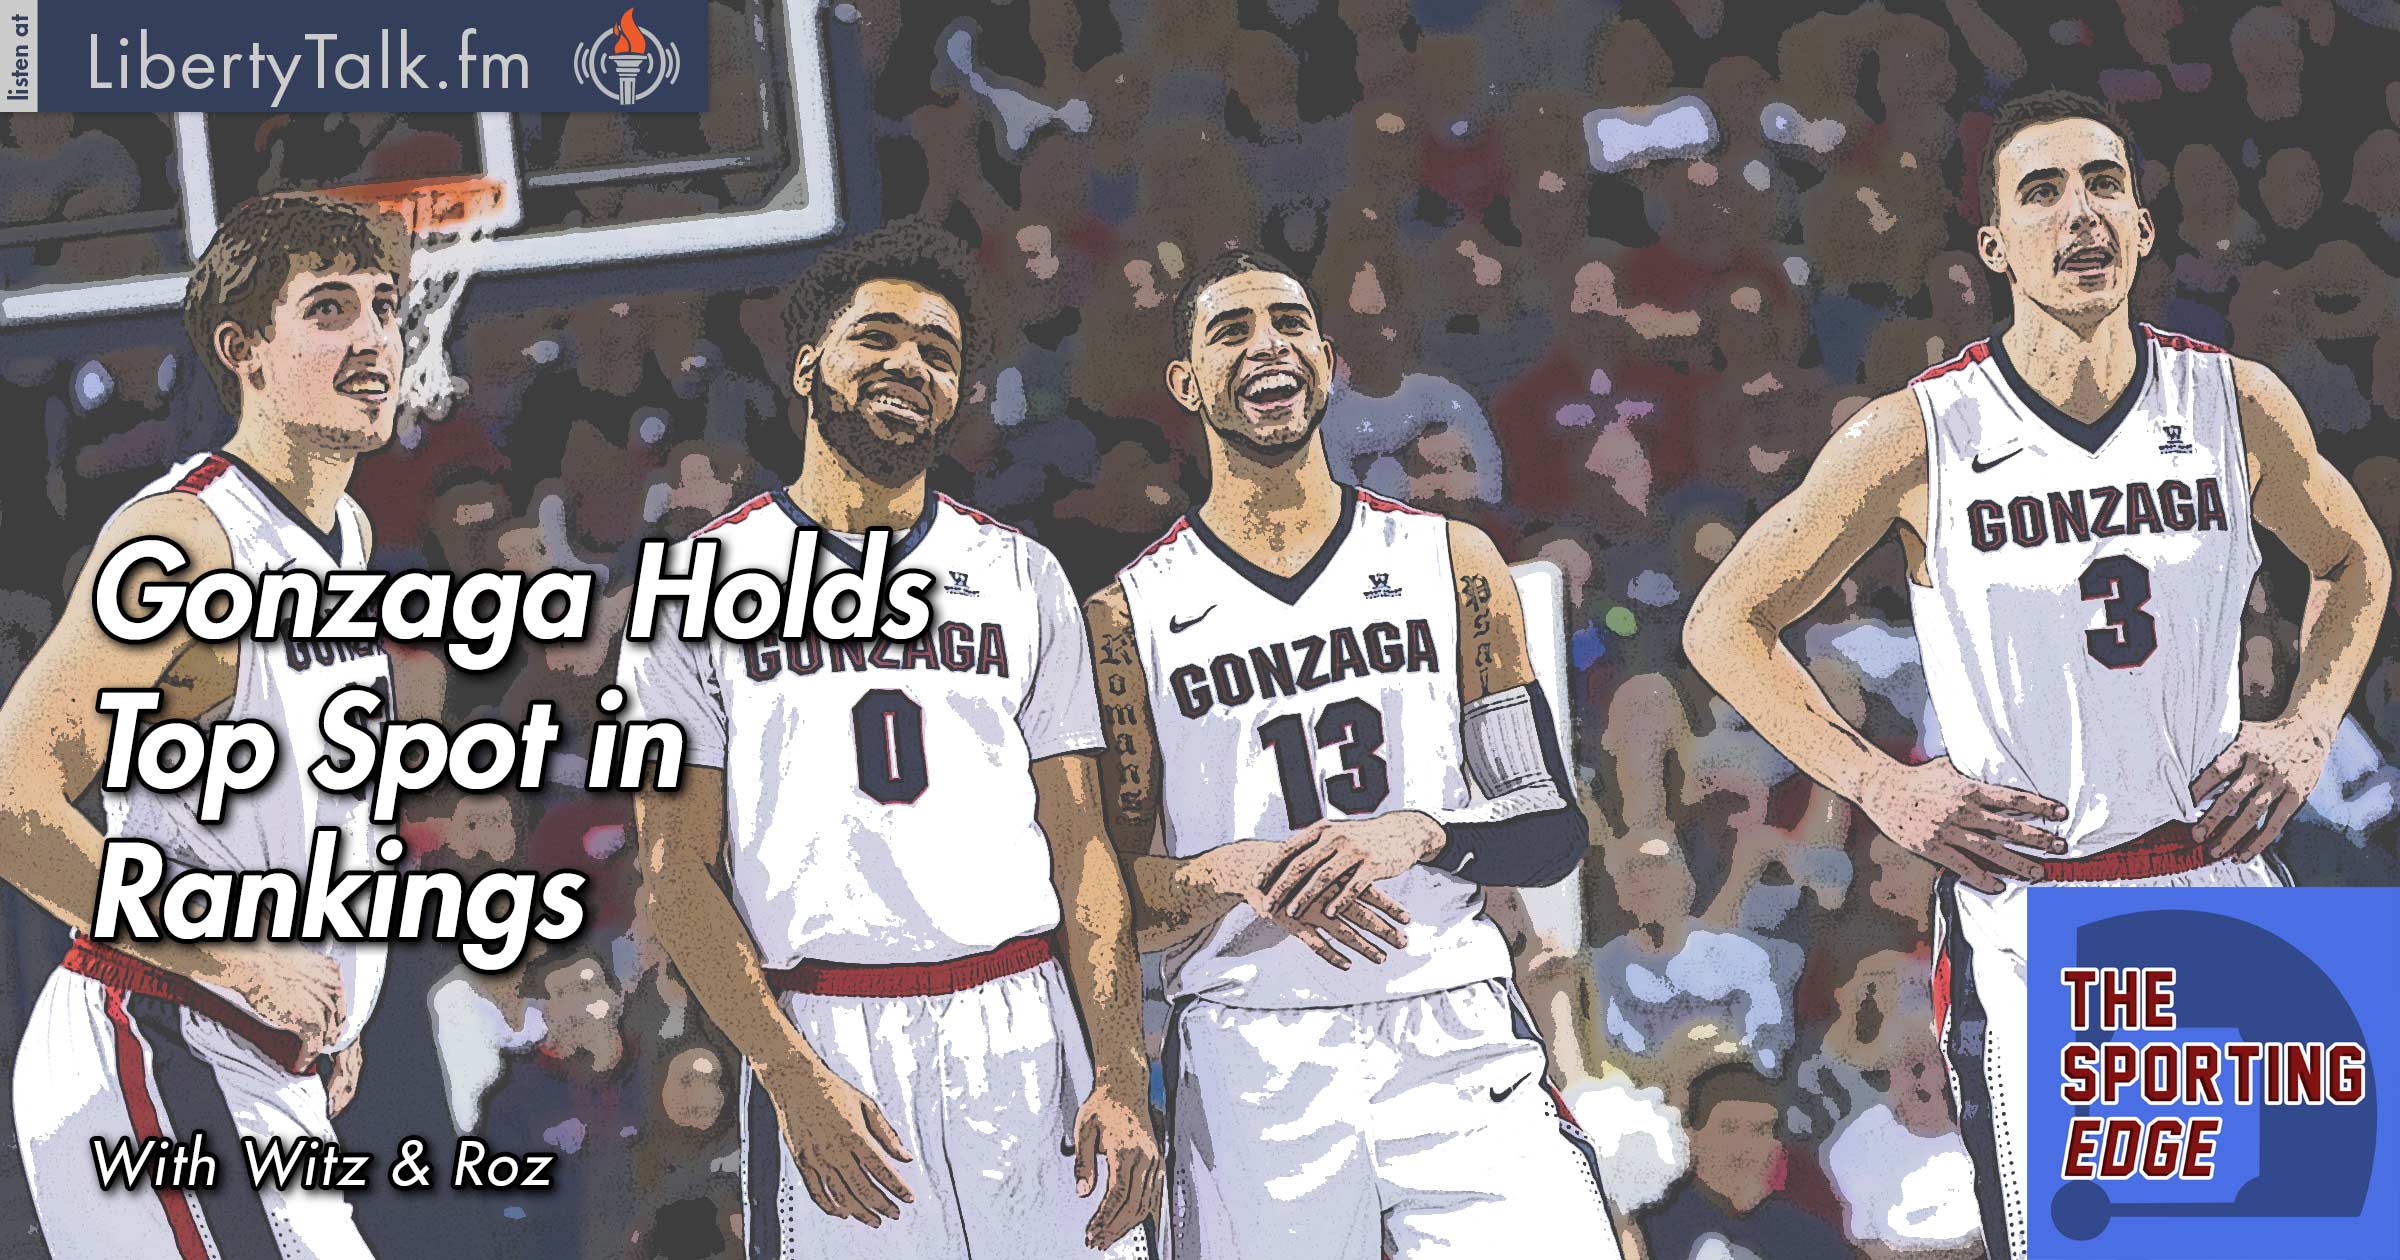 Gonzaga Holds Top Spot in Rankings - The Sporting Edge